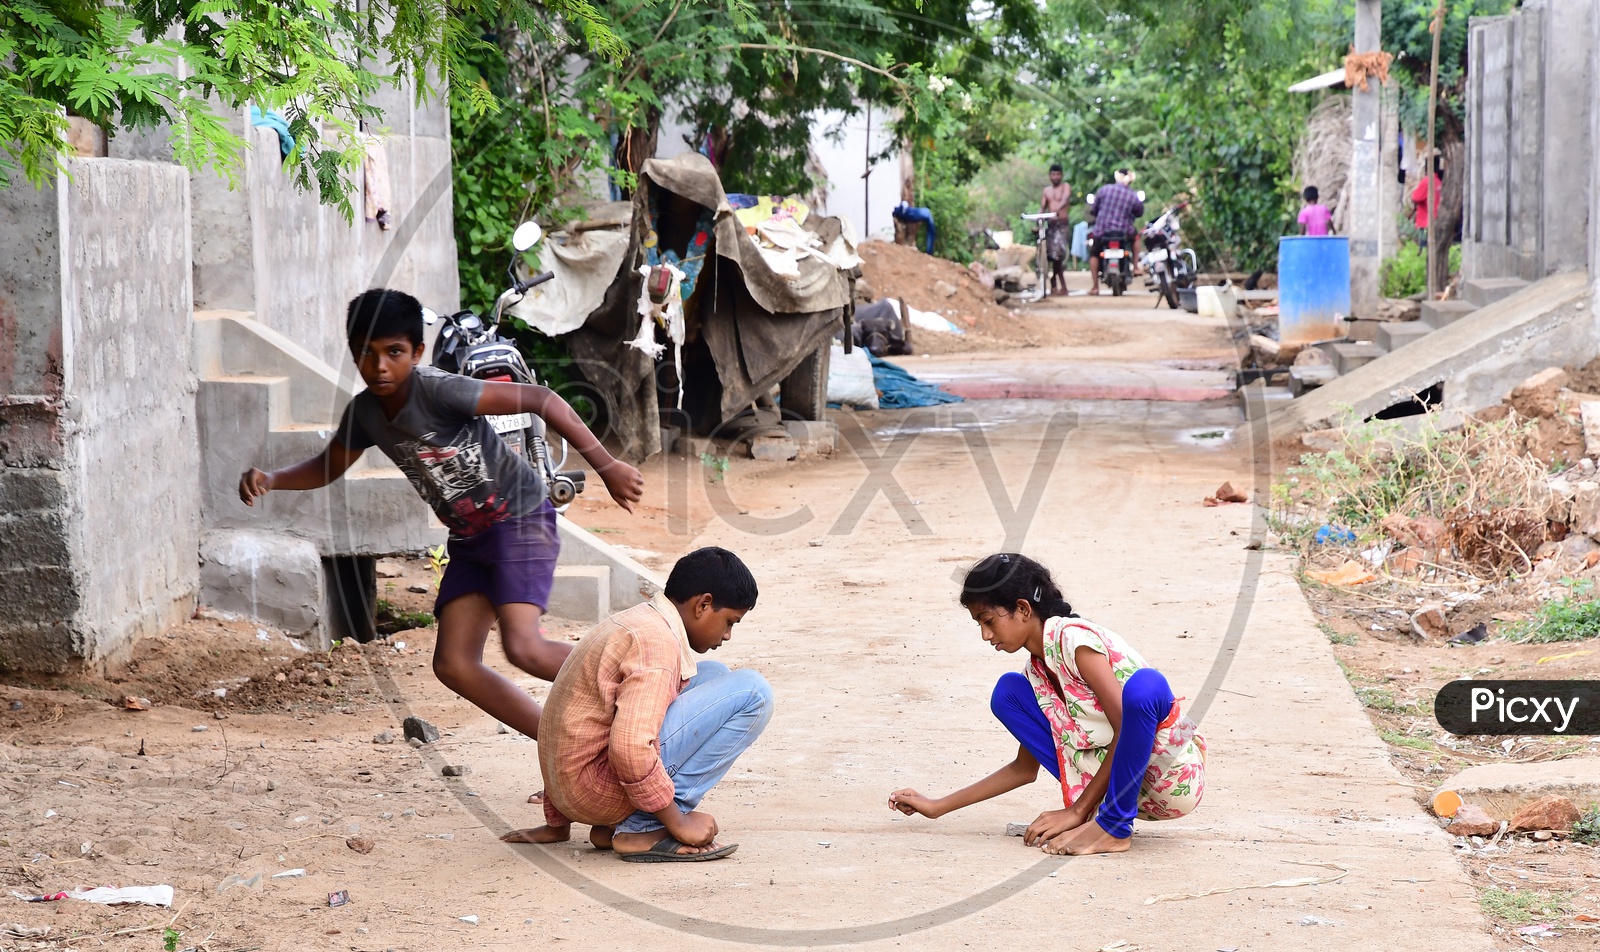 Children Playing  Games On Streets Enjoying Their Vacation